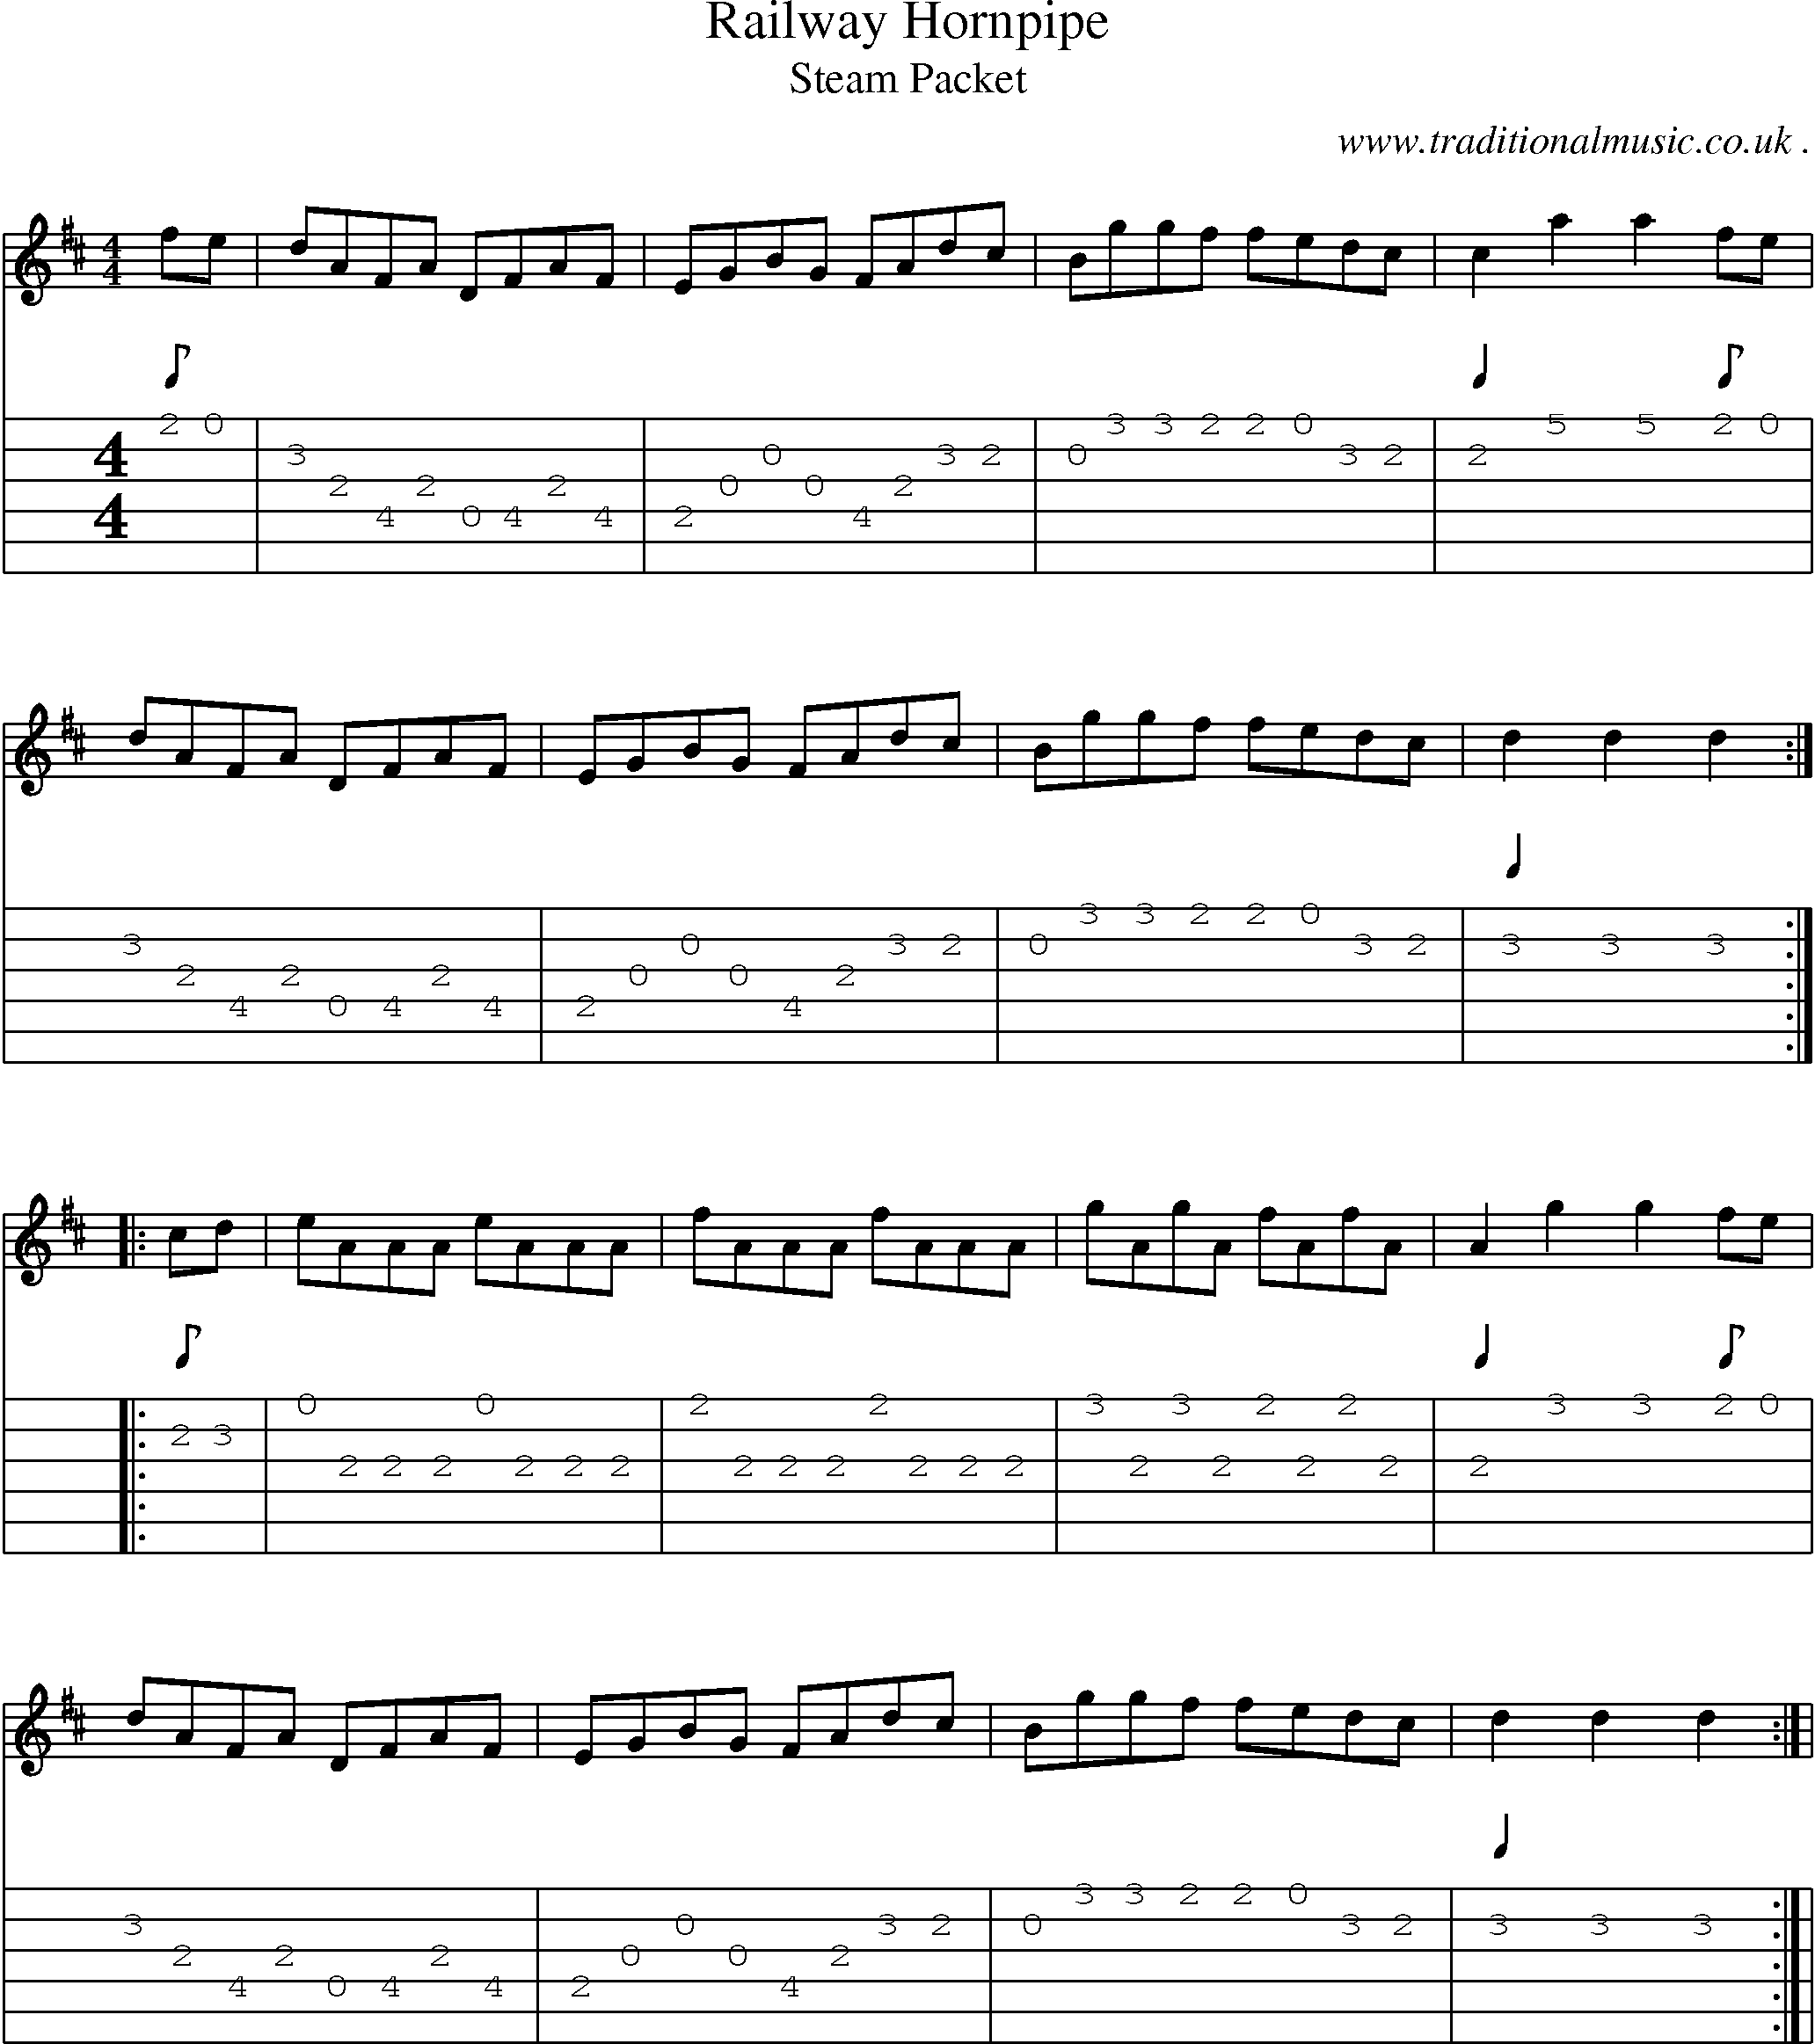 Sheet-Music and Guitar Tabs for Railway Hornpipe